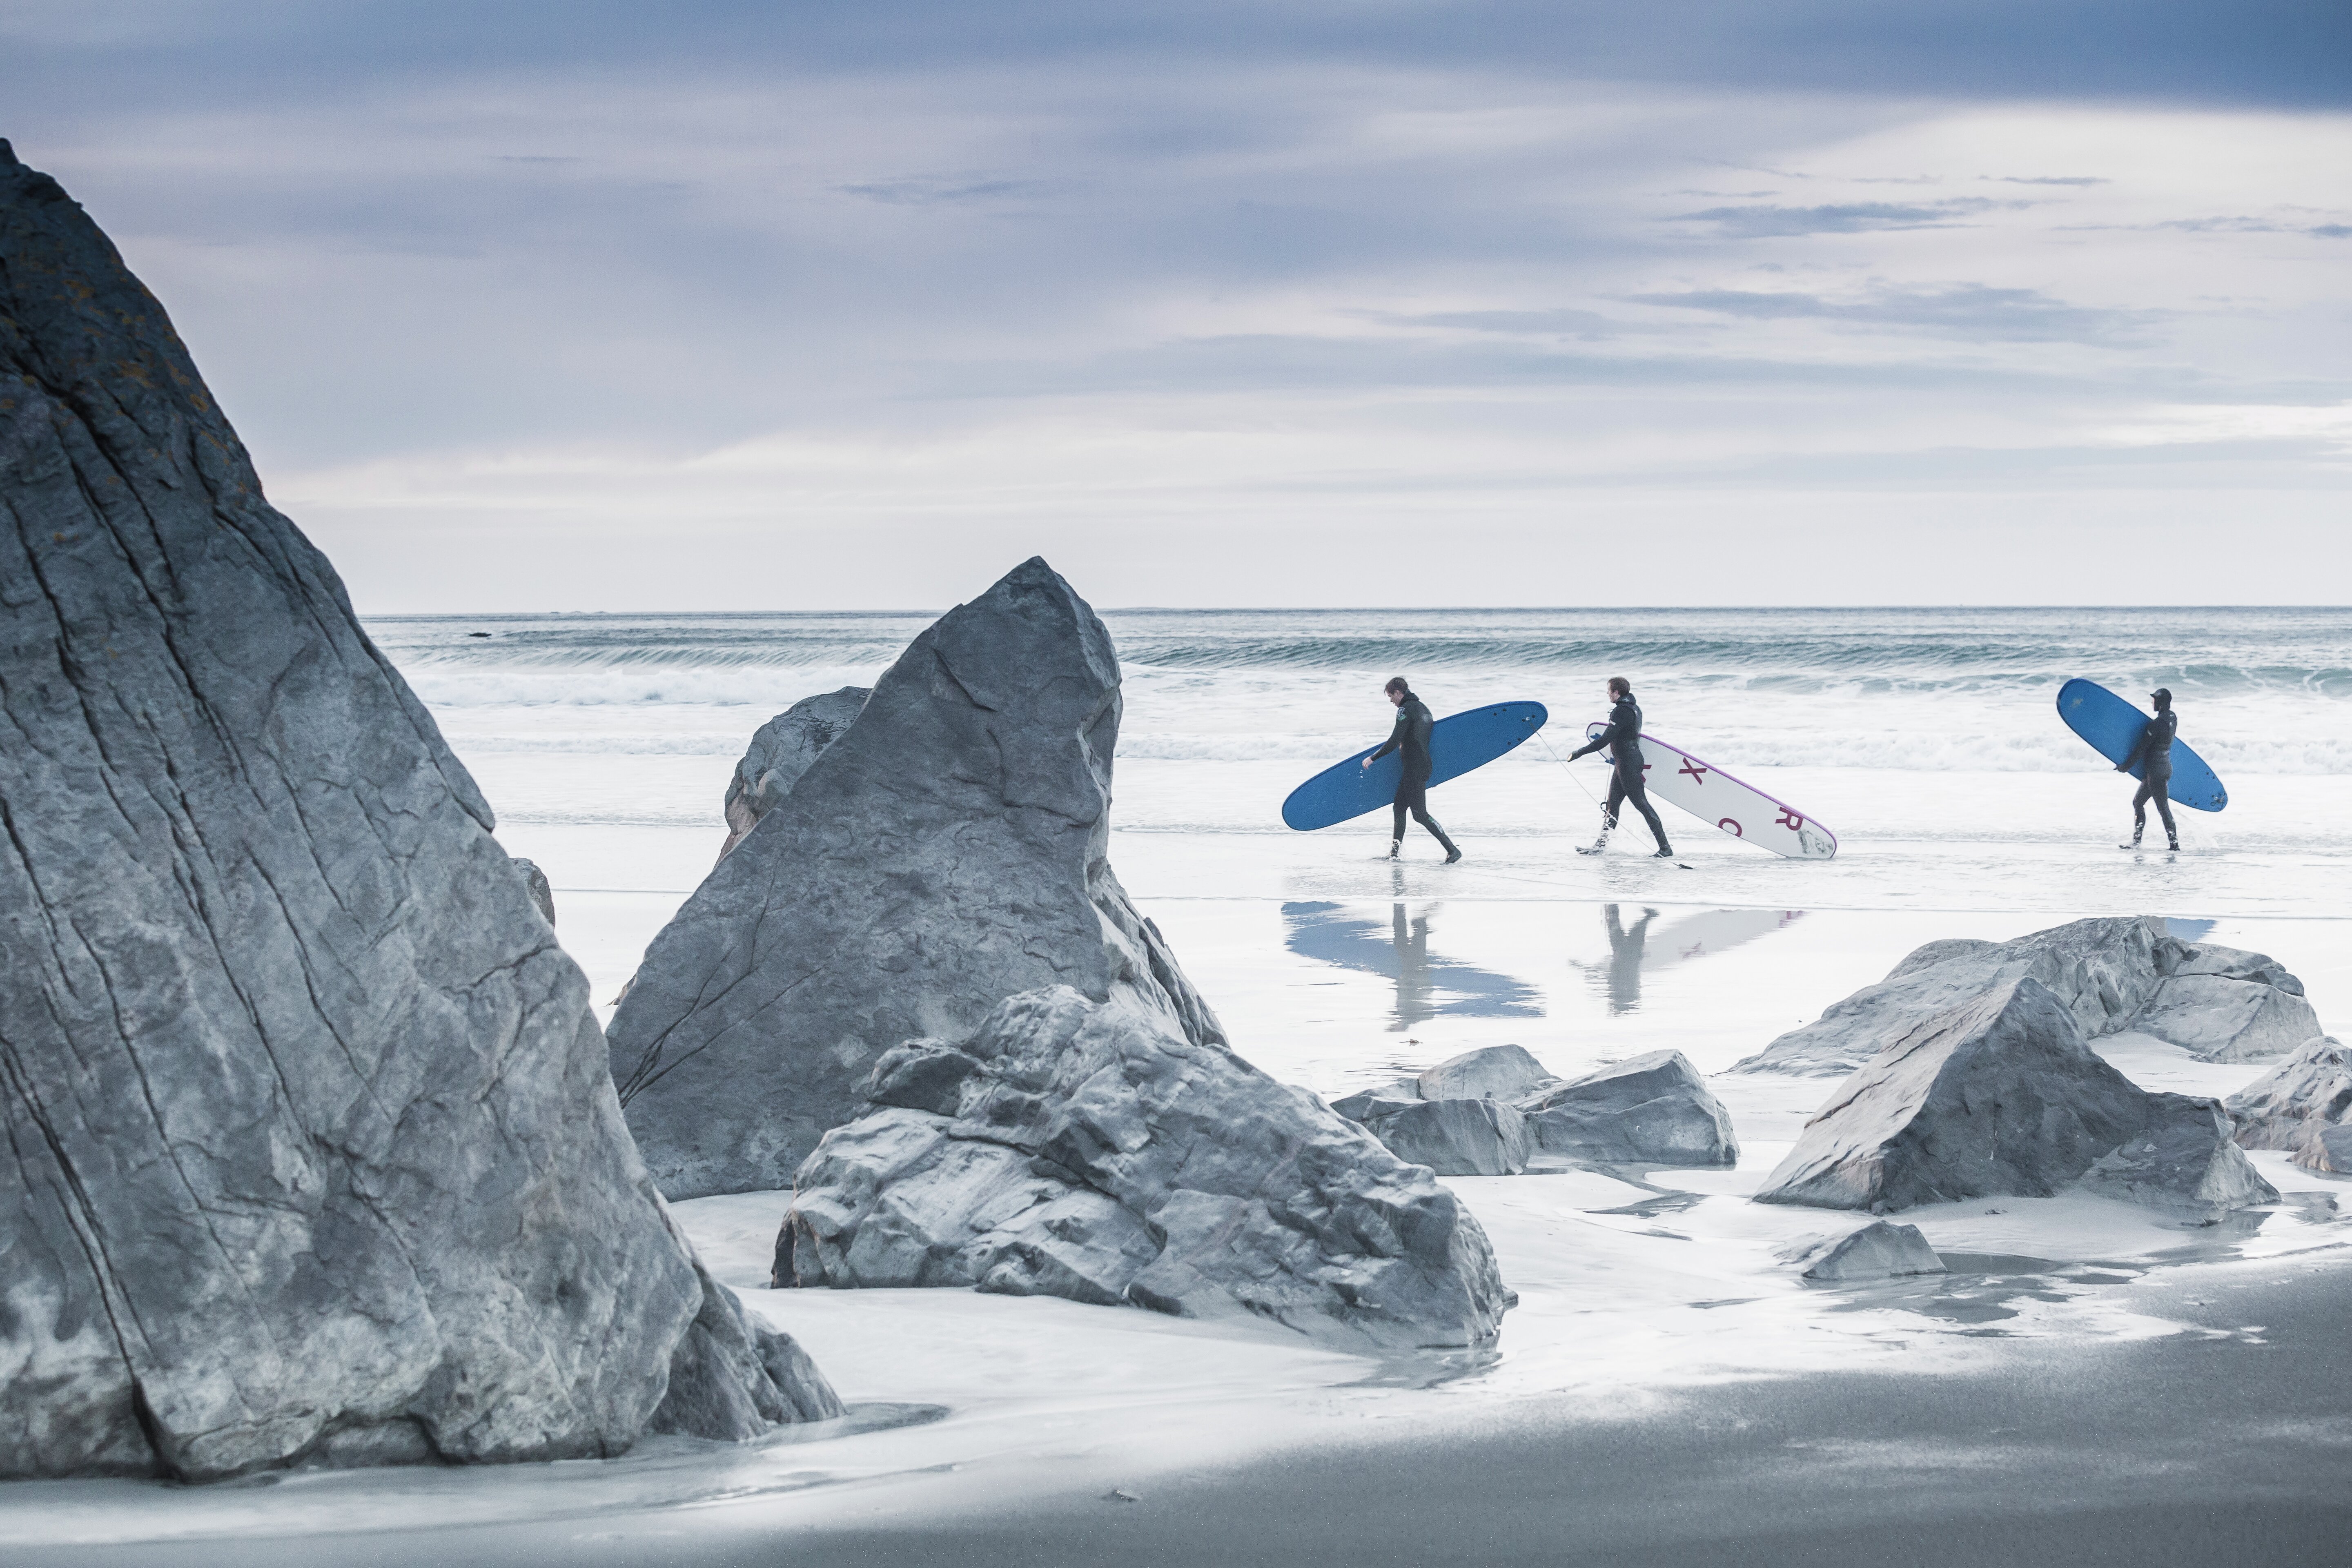 Surfing in the cold north